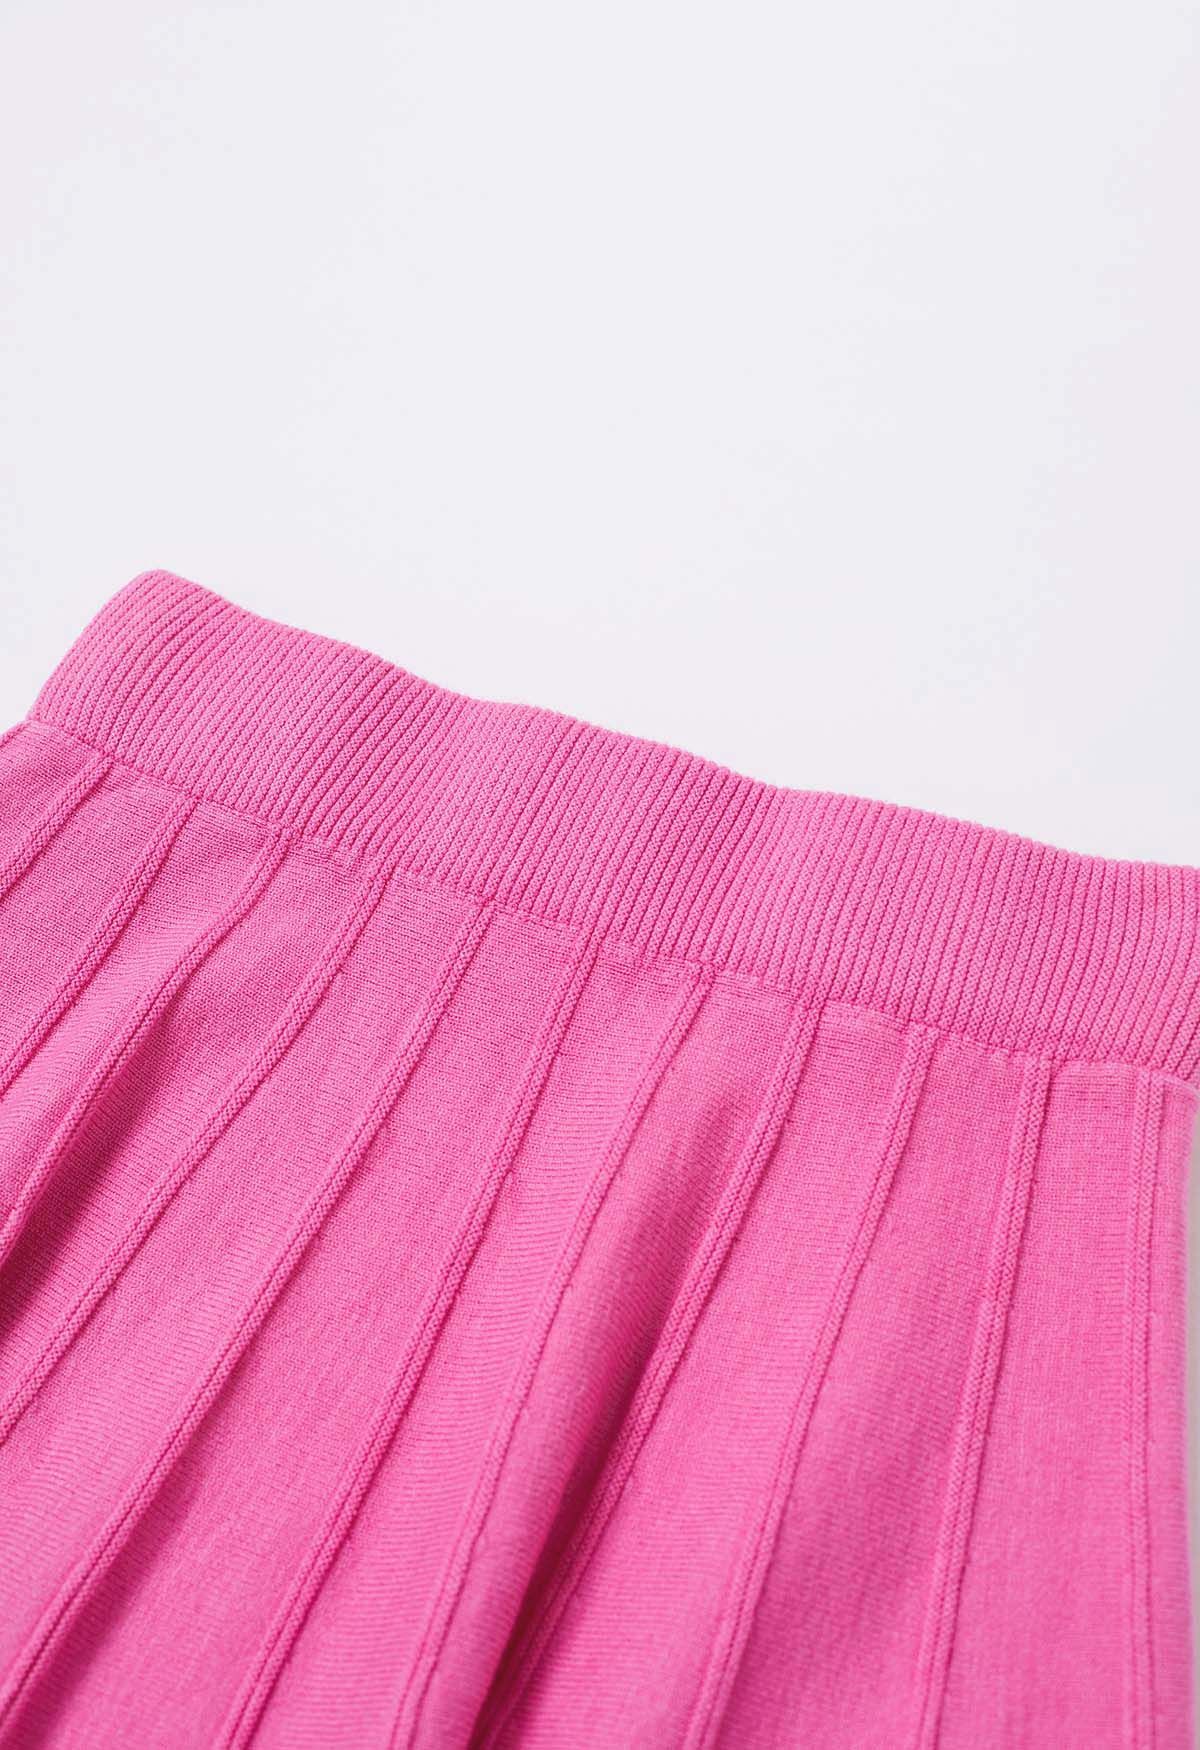 Silver Bead Embellished Seam Knit Skirt in Magenta